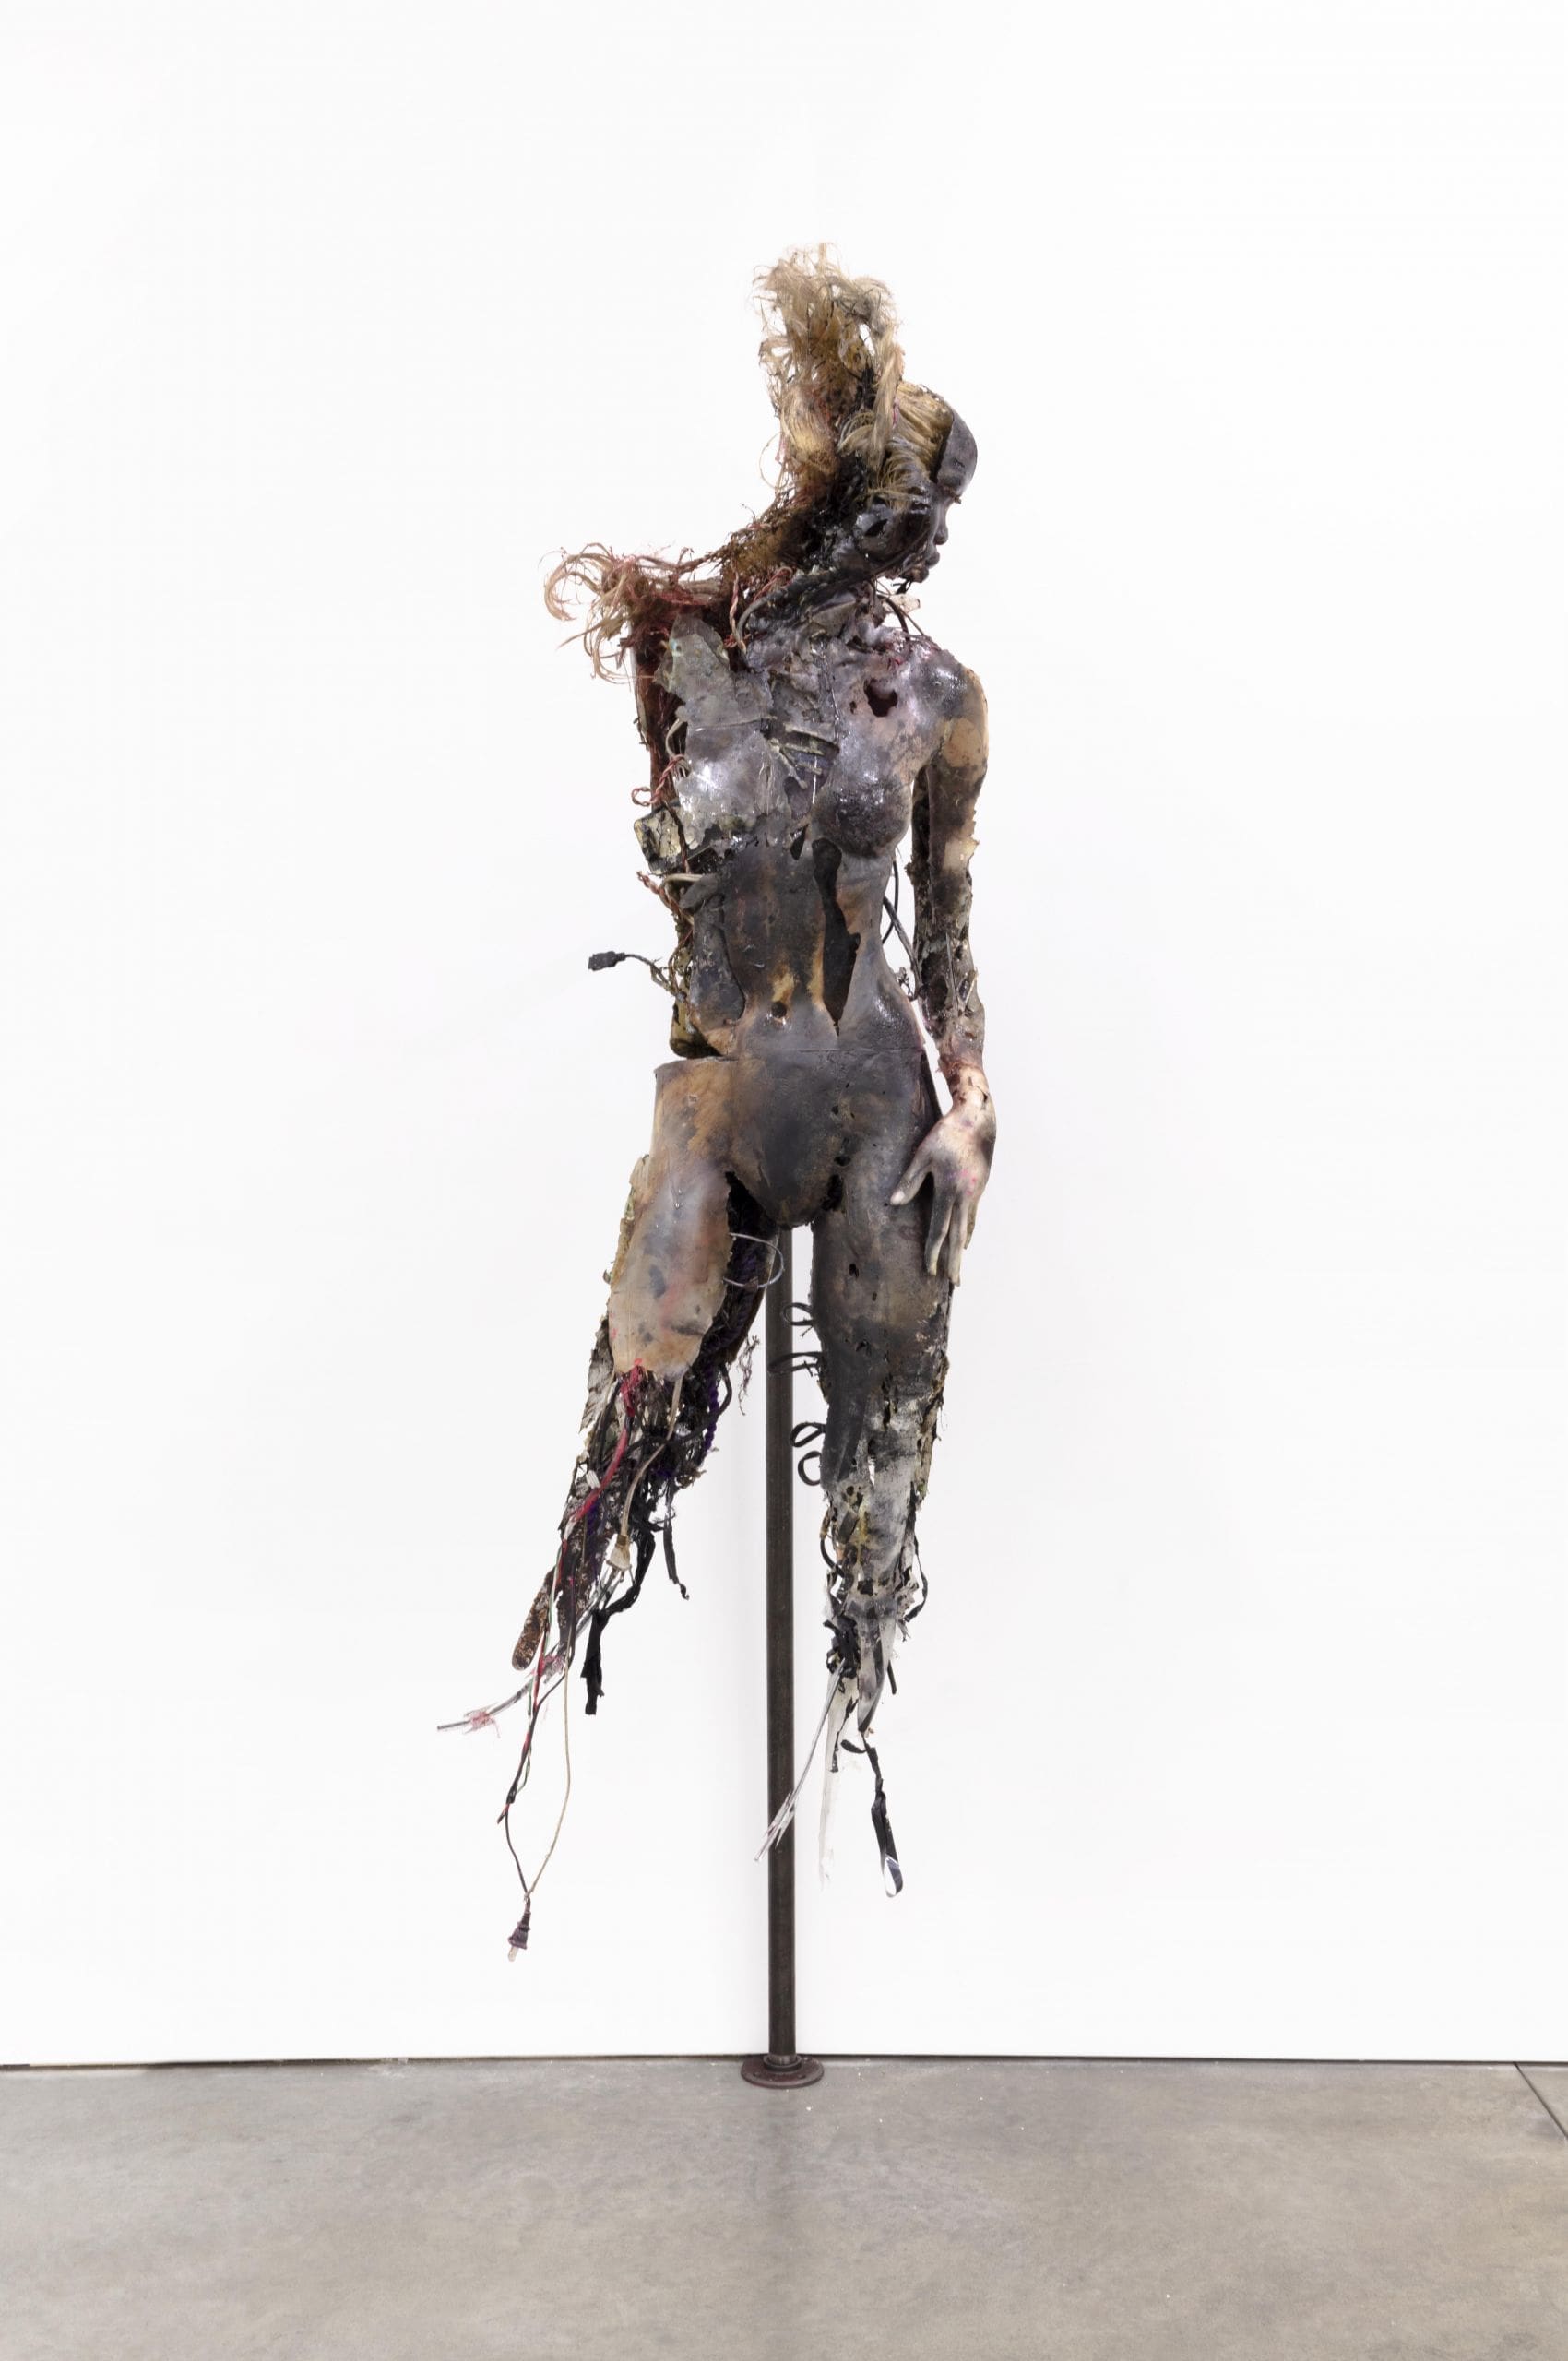 Stewart Uoo, Don't Touch Me (Unidentified Figure II), 2018, polyurethane and urethane resin, epoxy, ink, pigment, acrylic paint, ferrofluid, wires, cables, clothing, accessories, acrylic nails, steel, razor wire, stainless steel barbells, synthetic hair, synthetic eyelashes, glitter, flies, maggot cocoons, dust, 82 × 28 × 26 inches (208.28 × 71.12 × 66.04 cm)